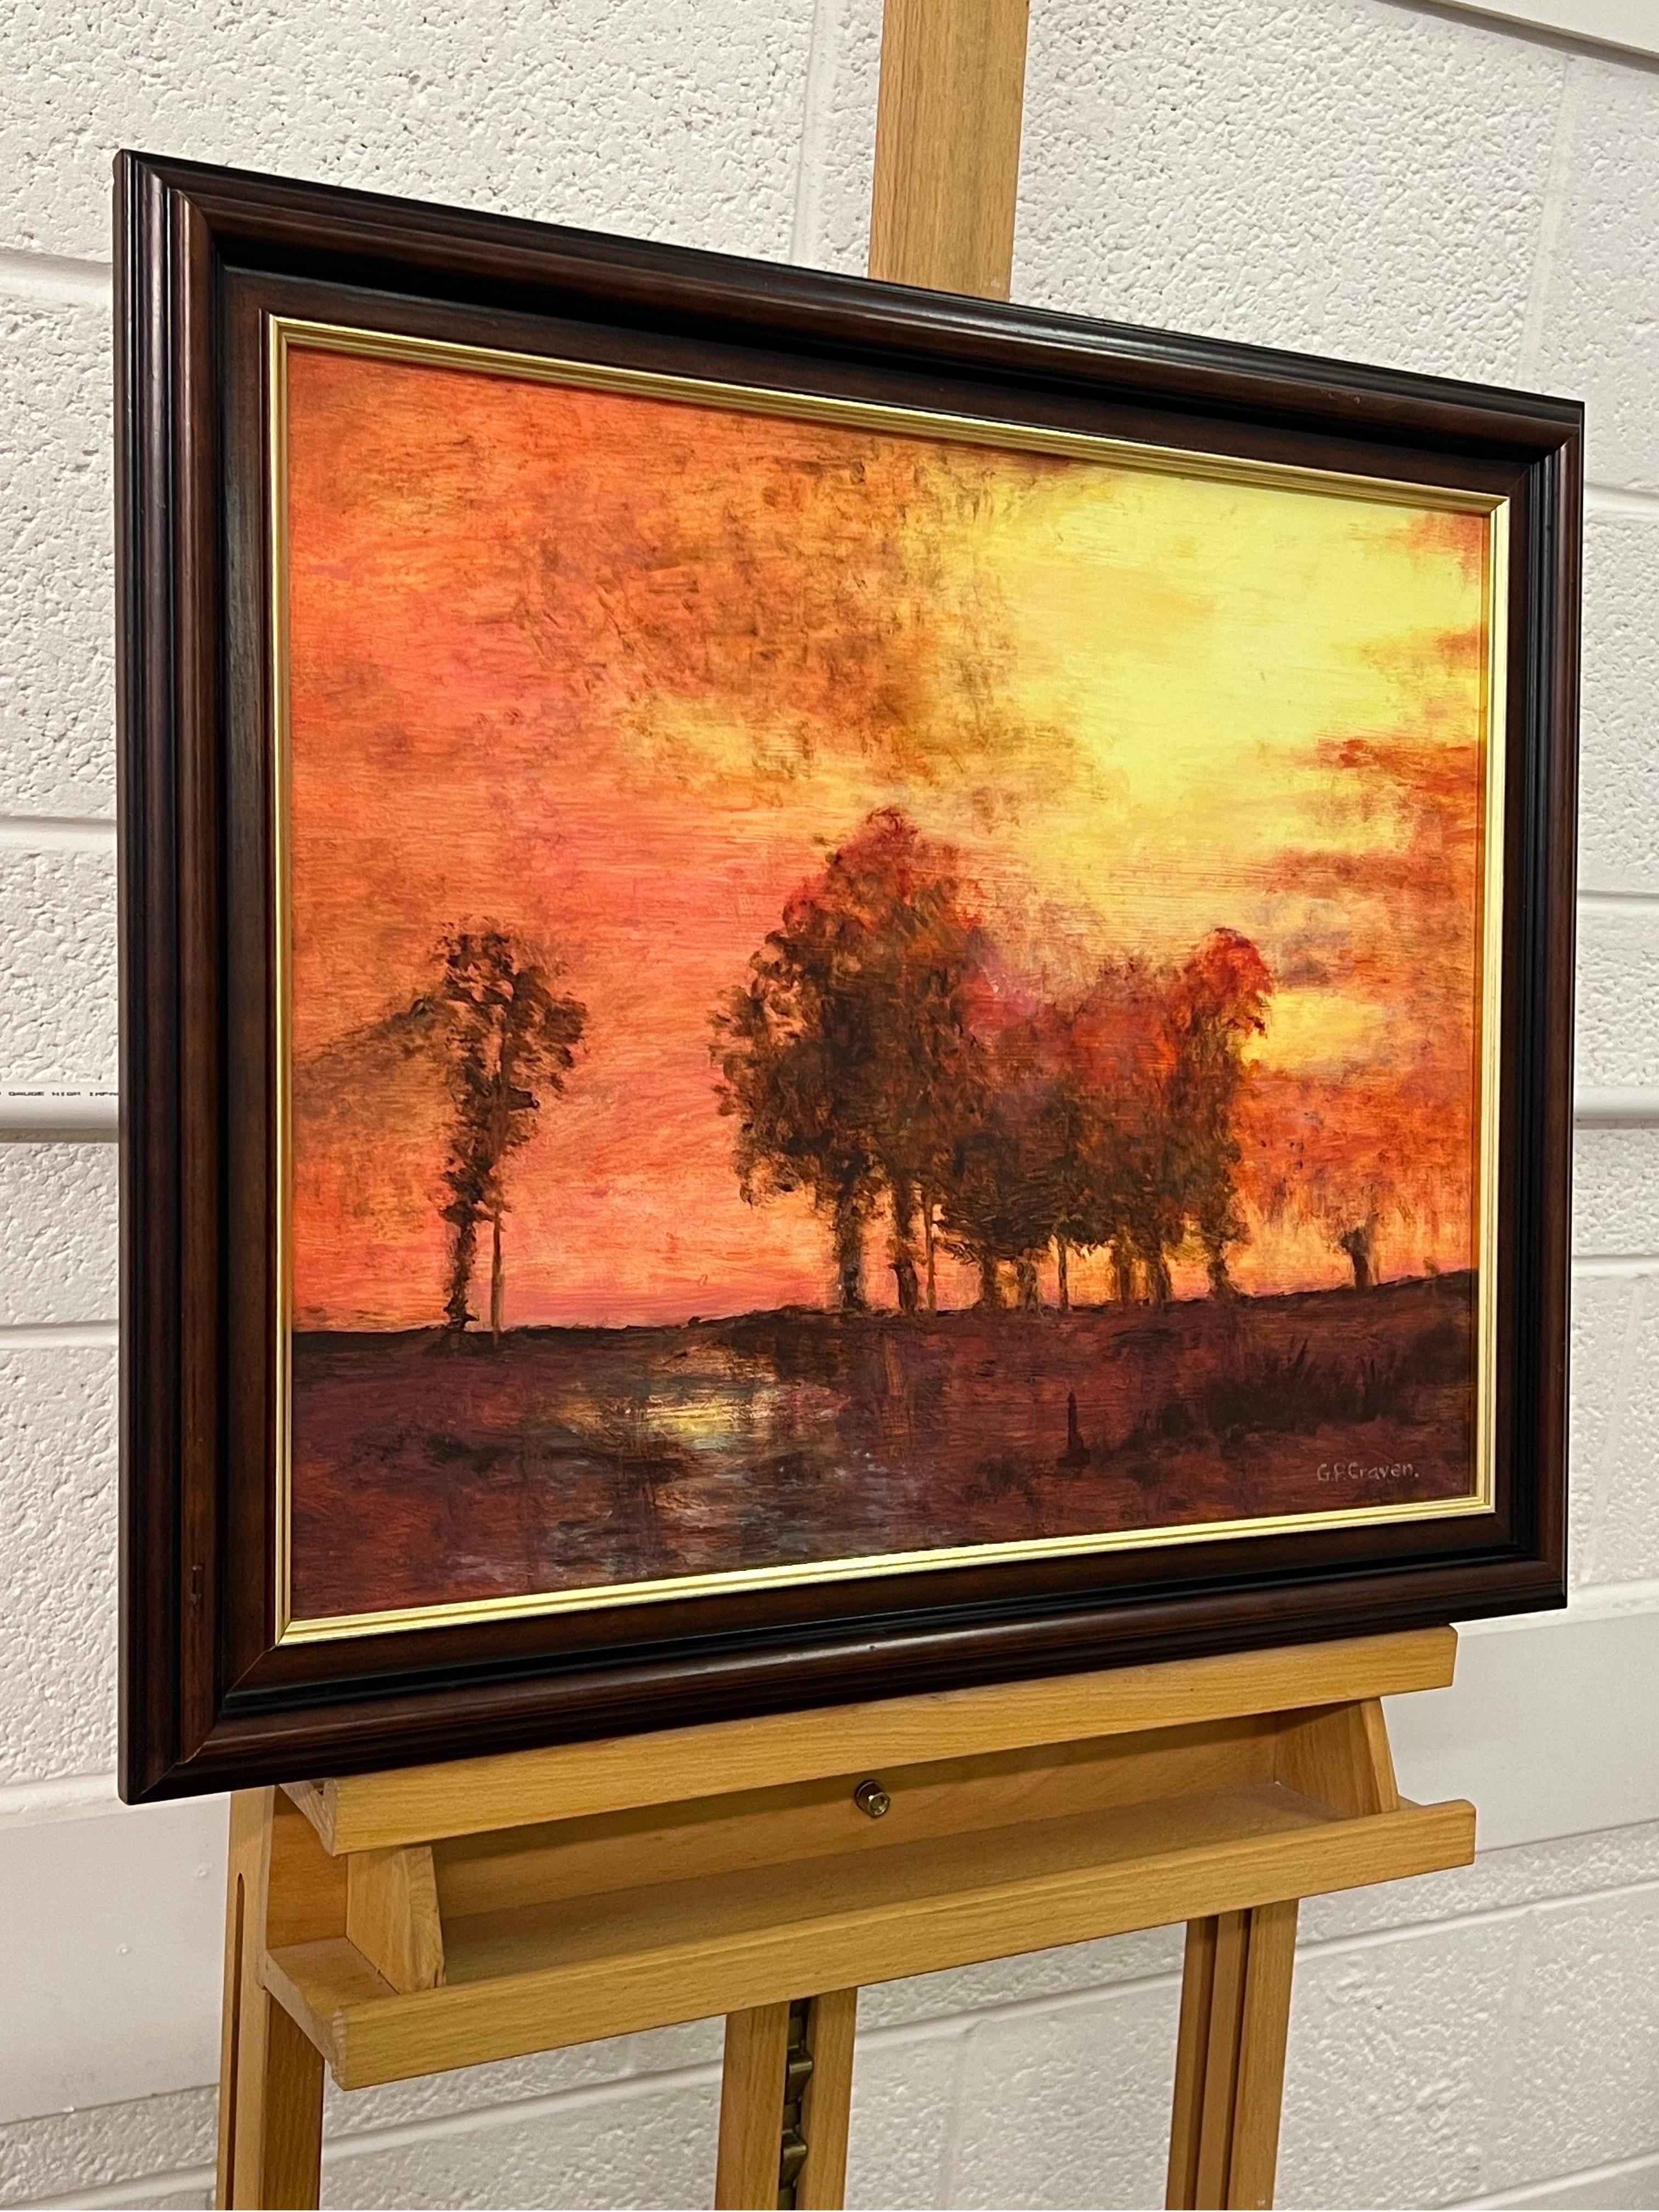 Tree Landscape Sunset with Oranges & Yellows by British Artist - Painting by Gabrielle Craven